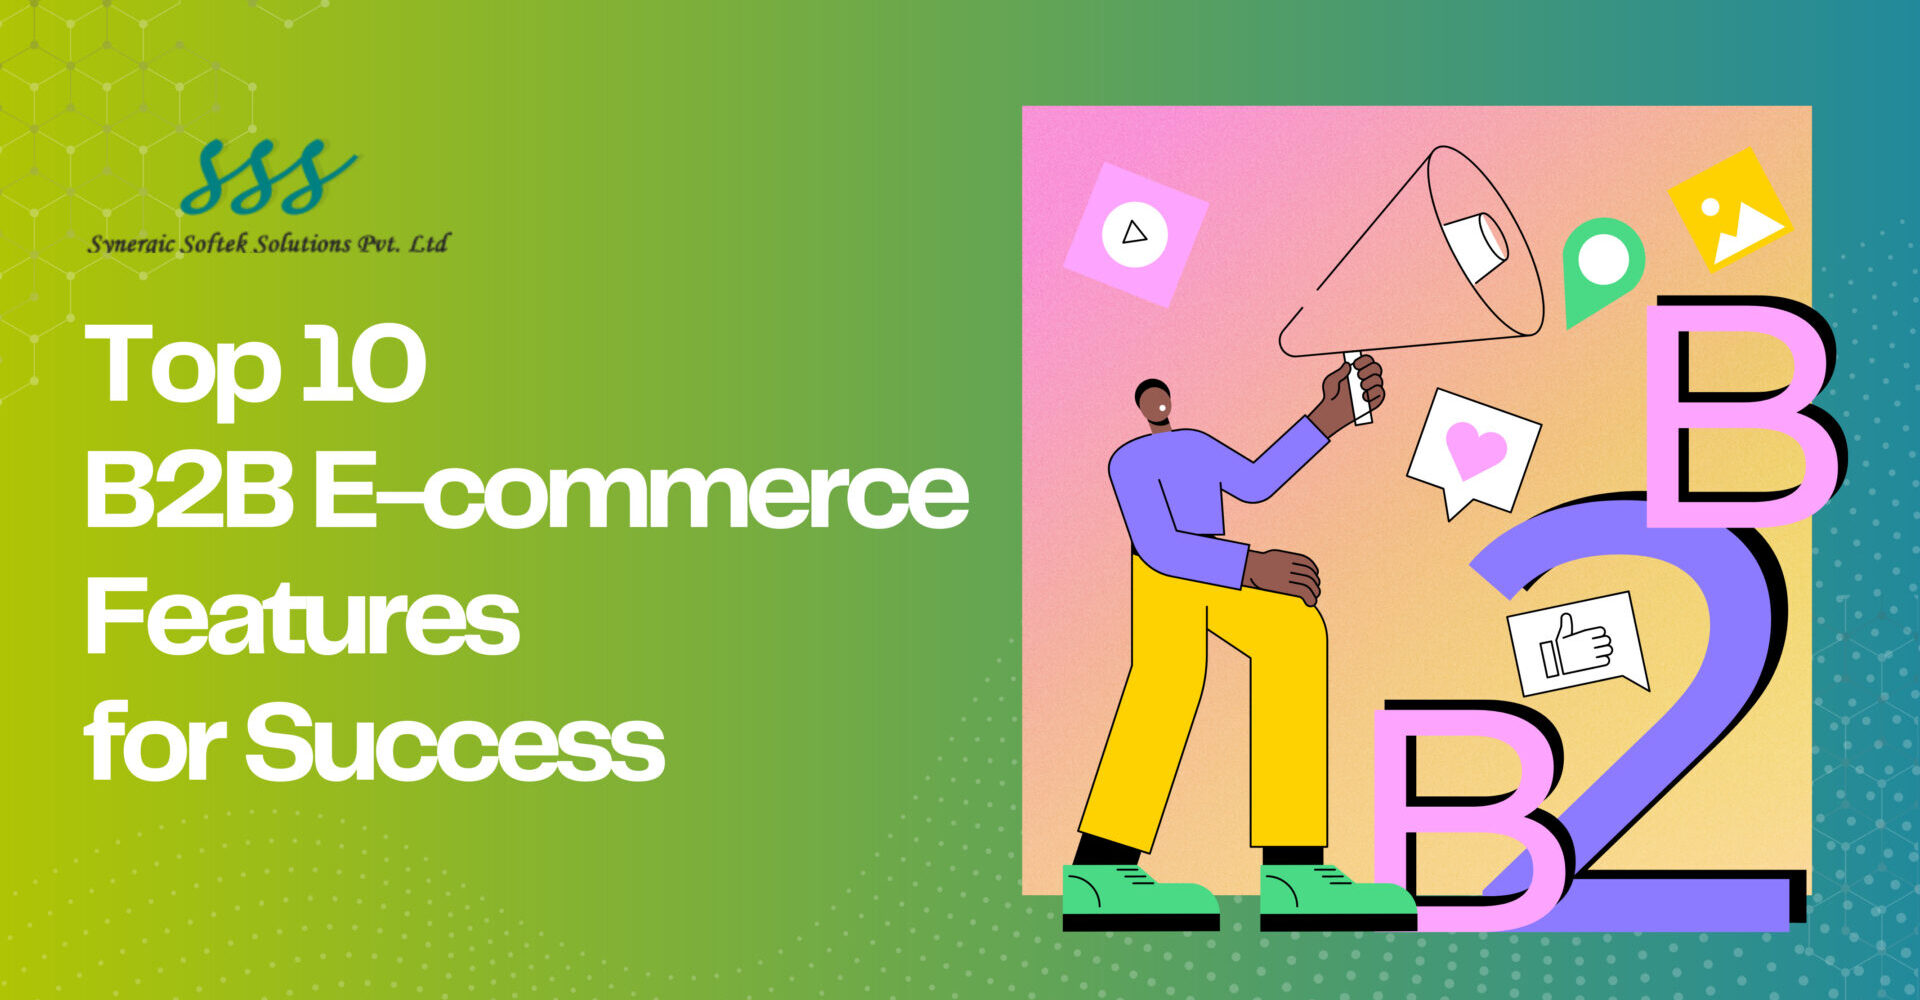 Top 10 B2B E-commerce Features for Success